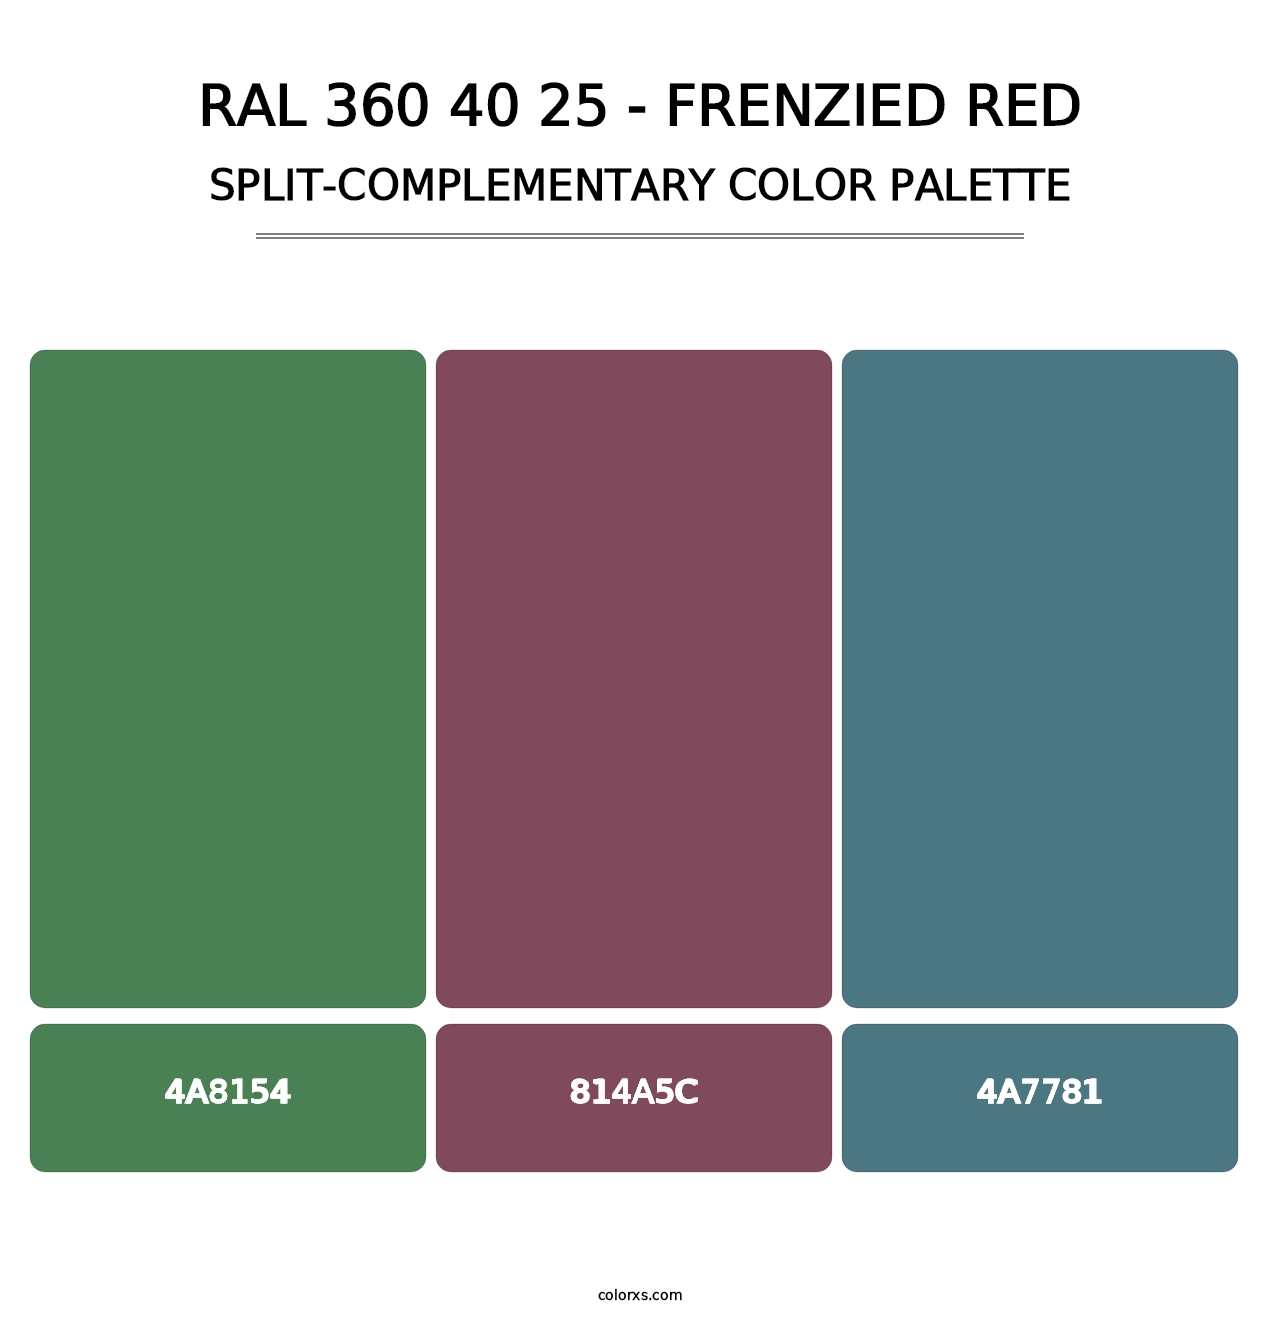 RAL 360 40 25 - Frenzied Red - Split-Complementary Color Palette